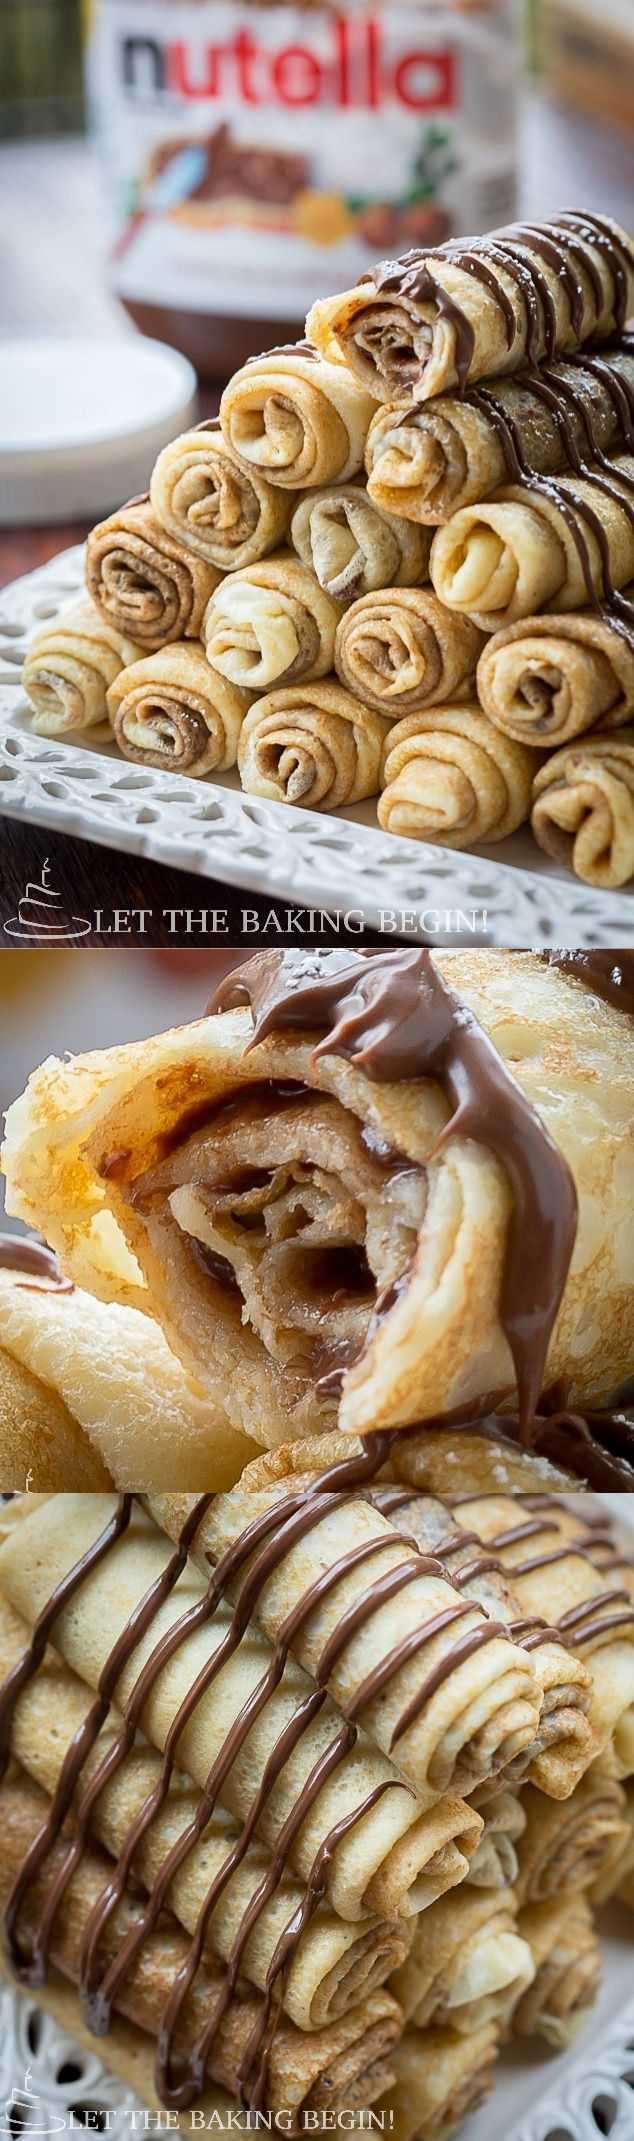 Nutella Stuffed Crepes & 3 Ways to Fold Them | By LetTheBakingBegin… | @Let the Baking Begin Blog!